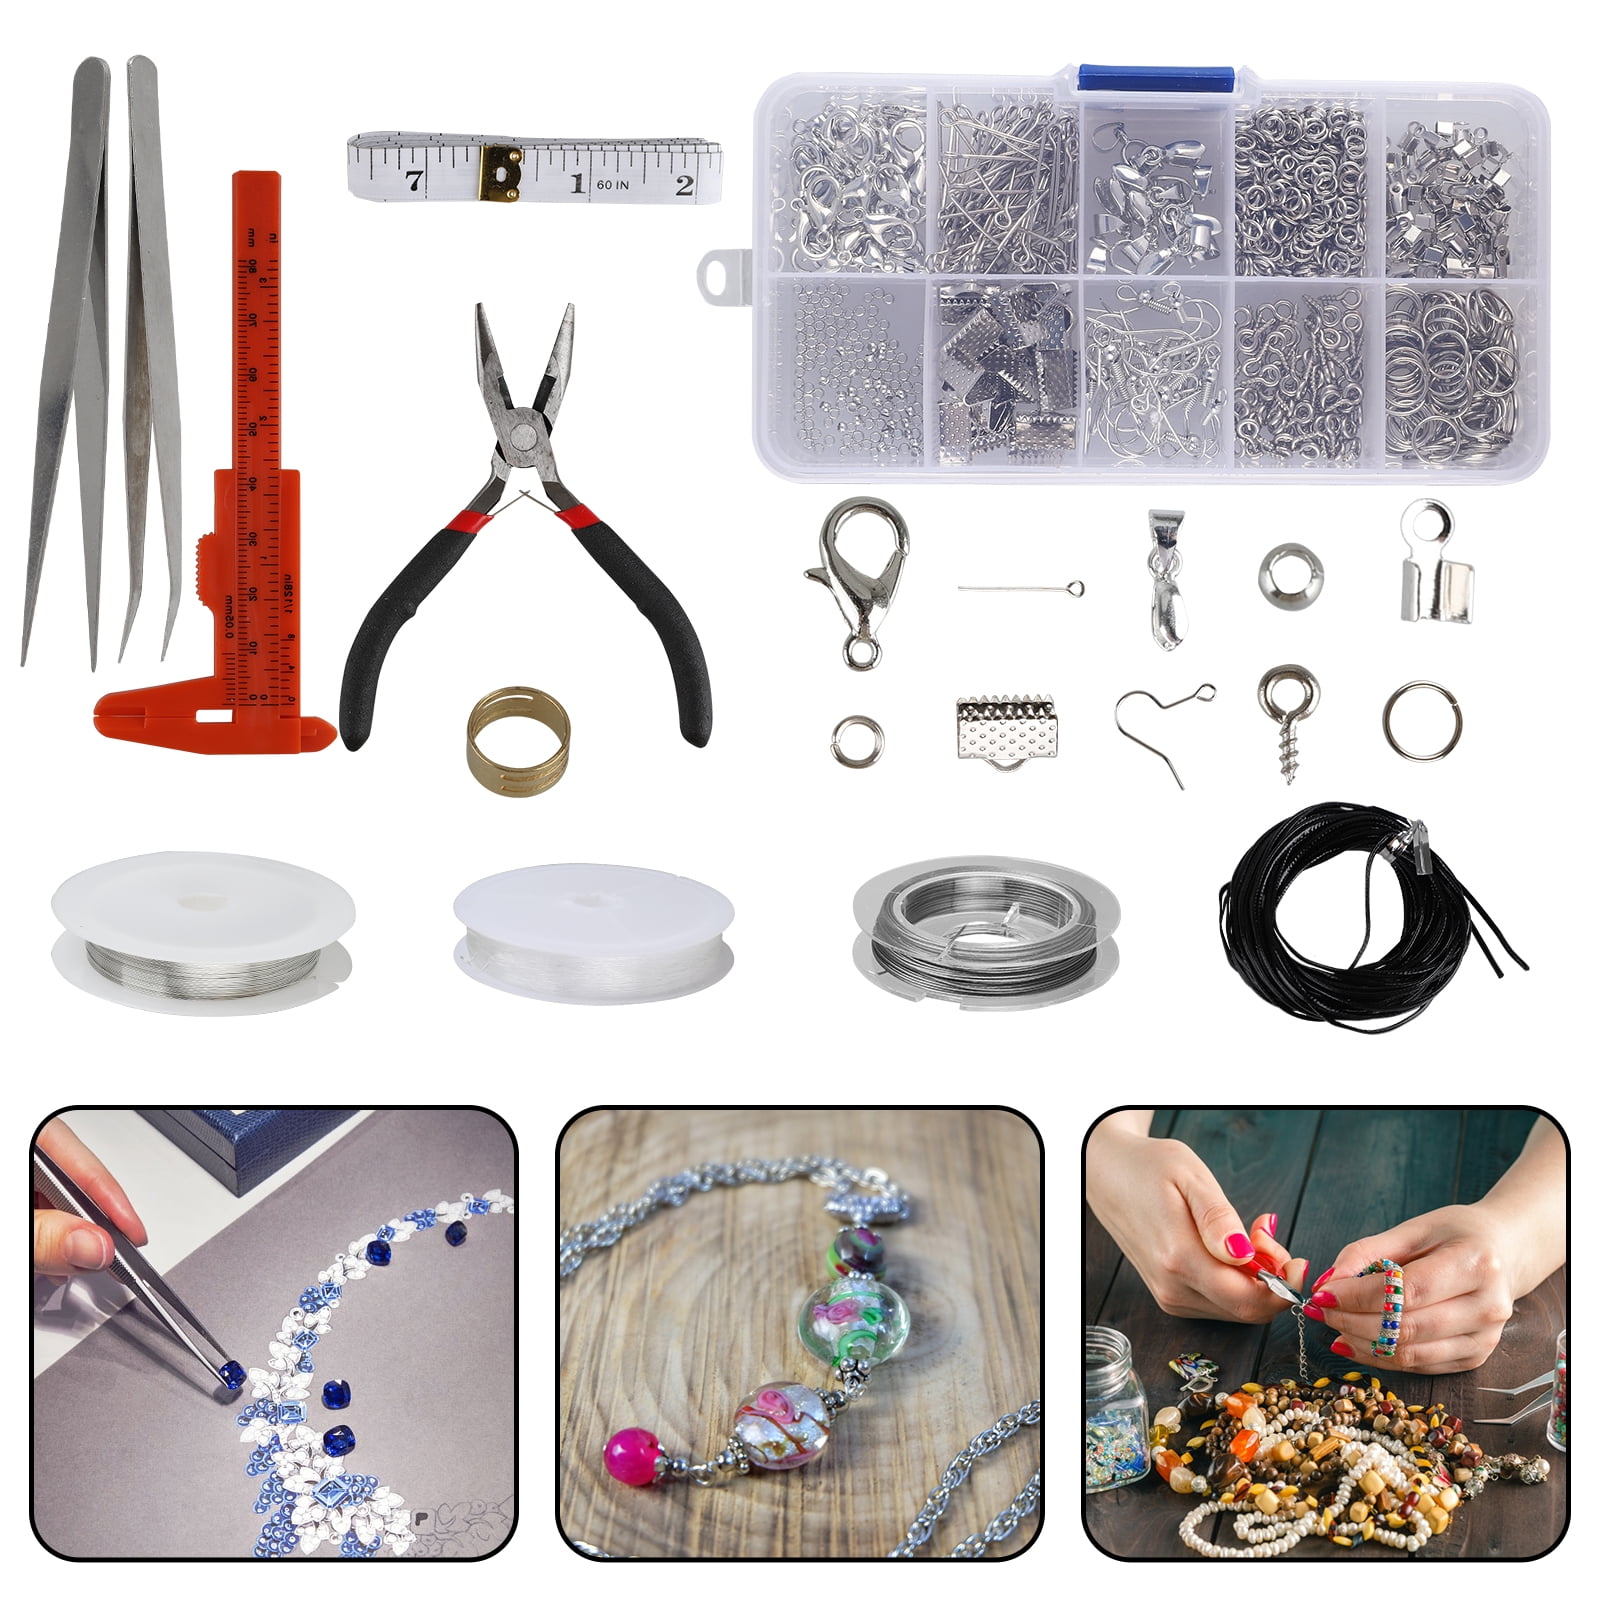  Hilitchi 1588Pcs Jewelry Making Supplies Kit Jewelry Wires  Jewelry Making Repair Tools Jewelry Pliers Jewelry Findings and Charms Wire  Wrapping and Beading with Storage Pouch